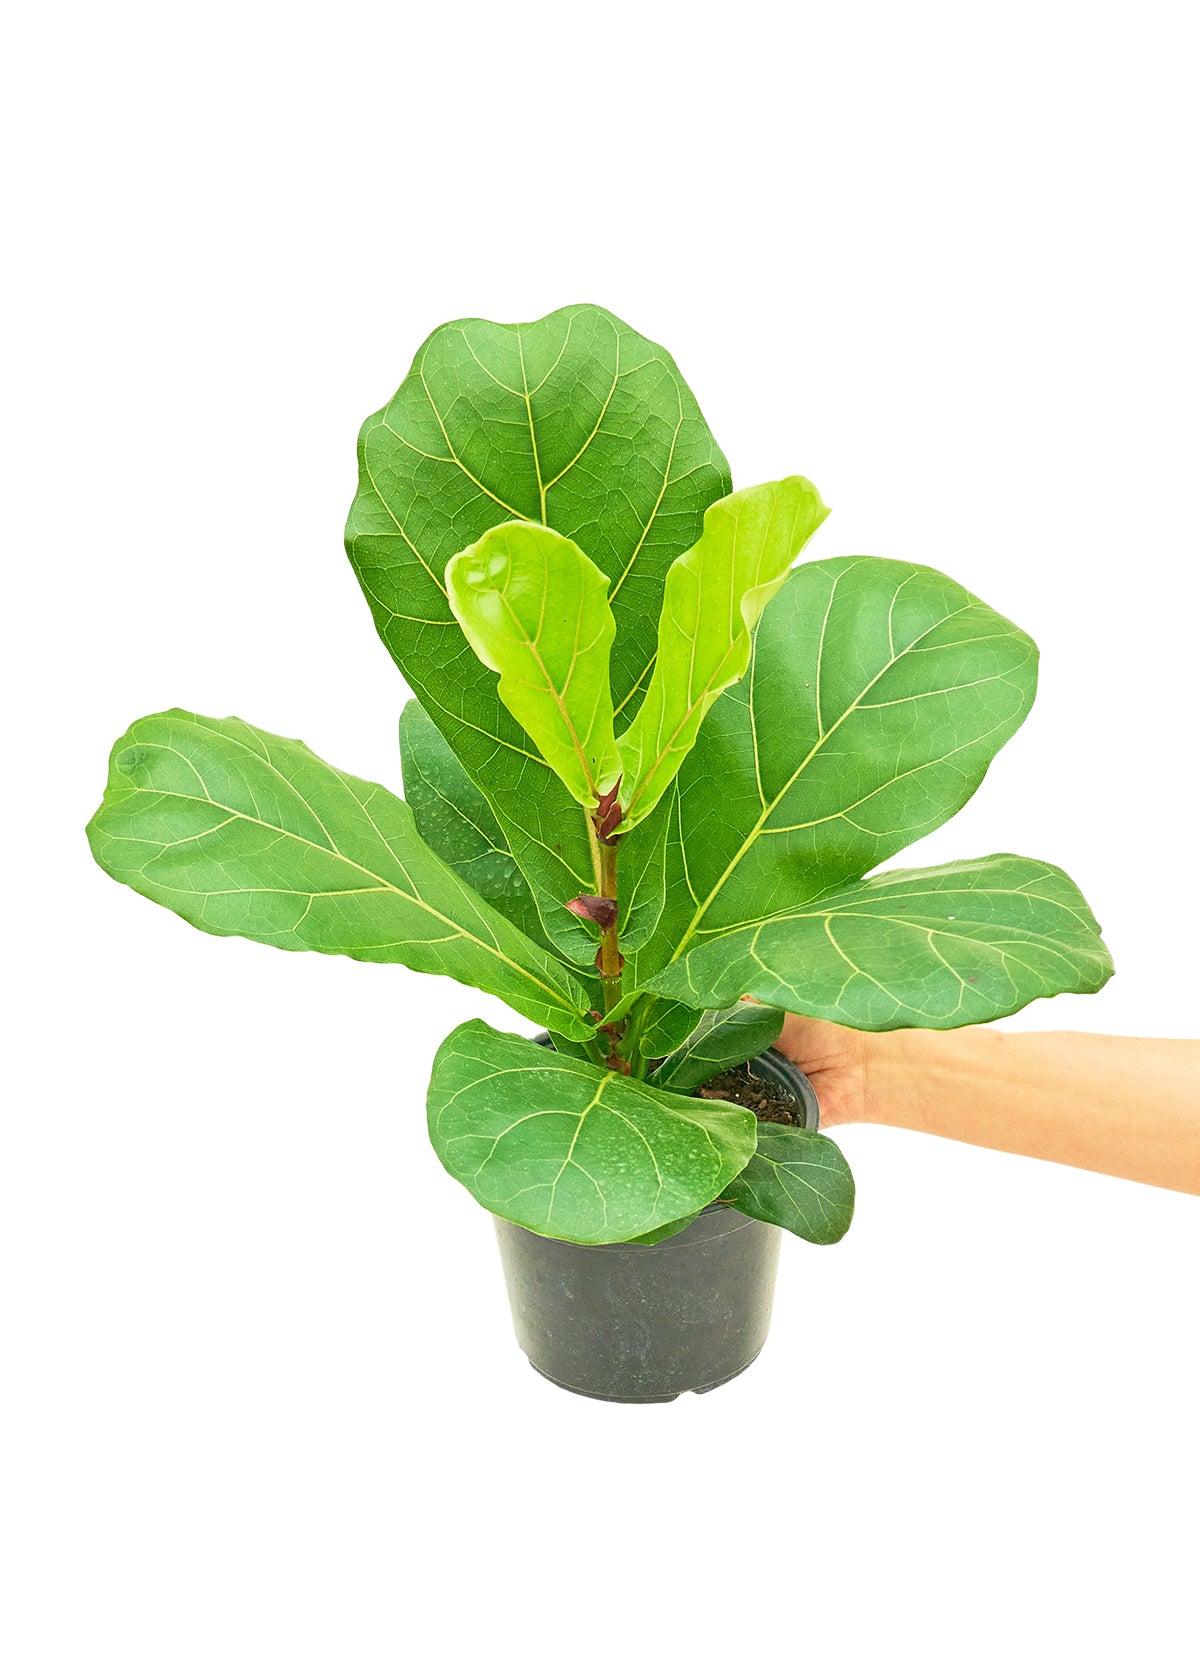 Medium Size Fiddle Leaf Fig Plant in growers pot with a white background with a hand holding the pot showing the top view.